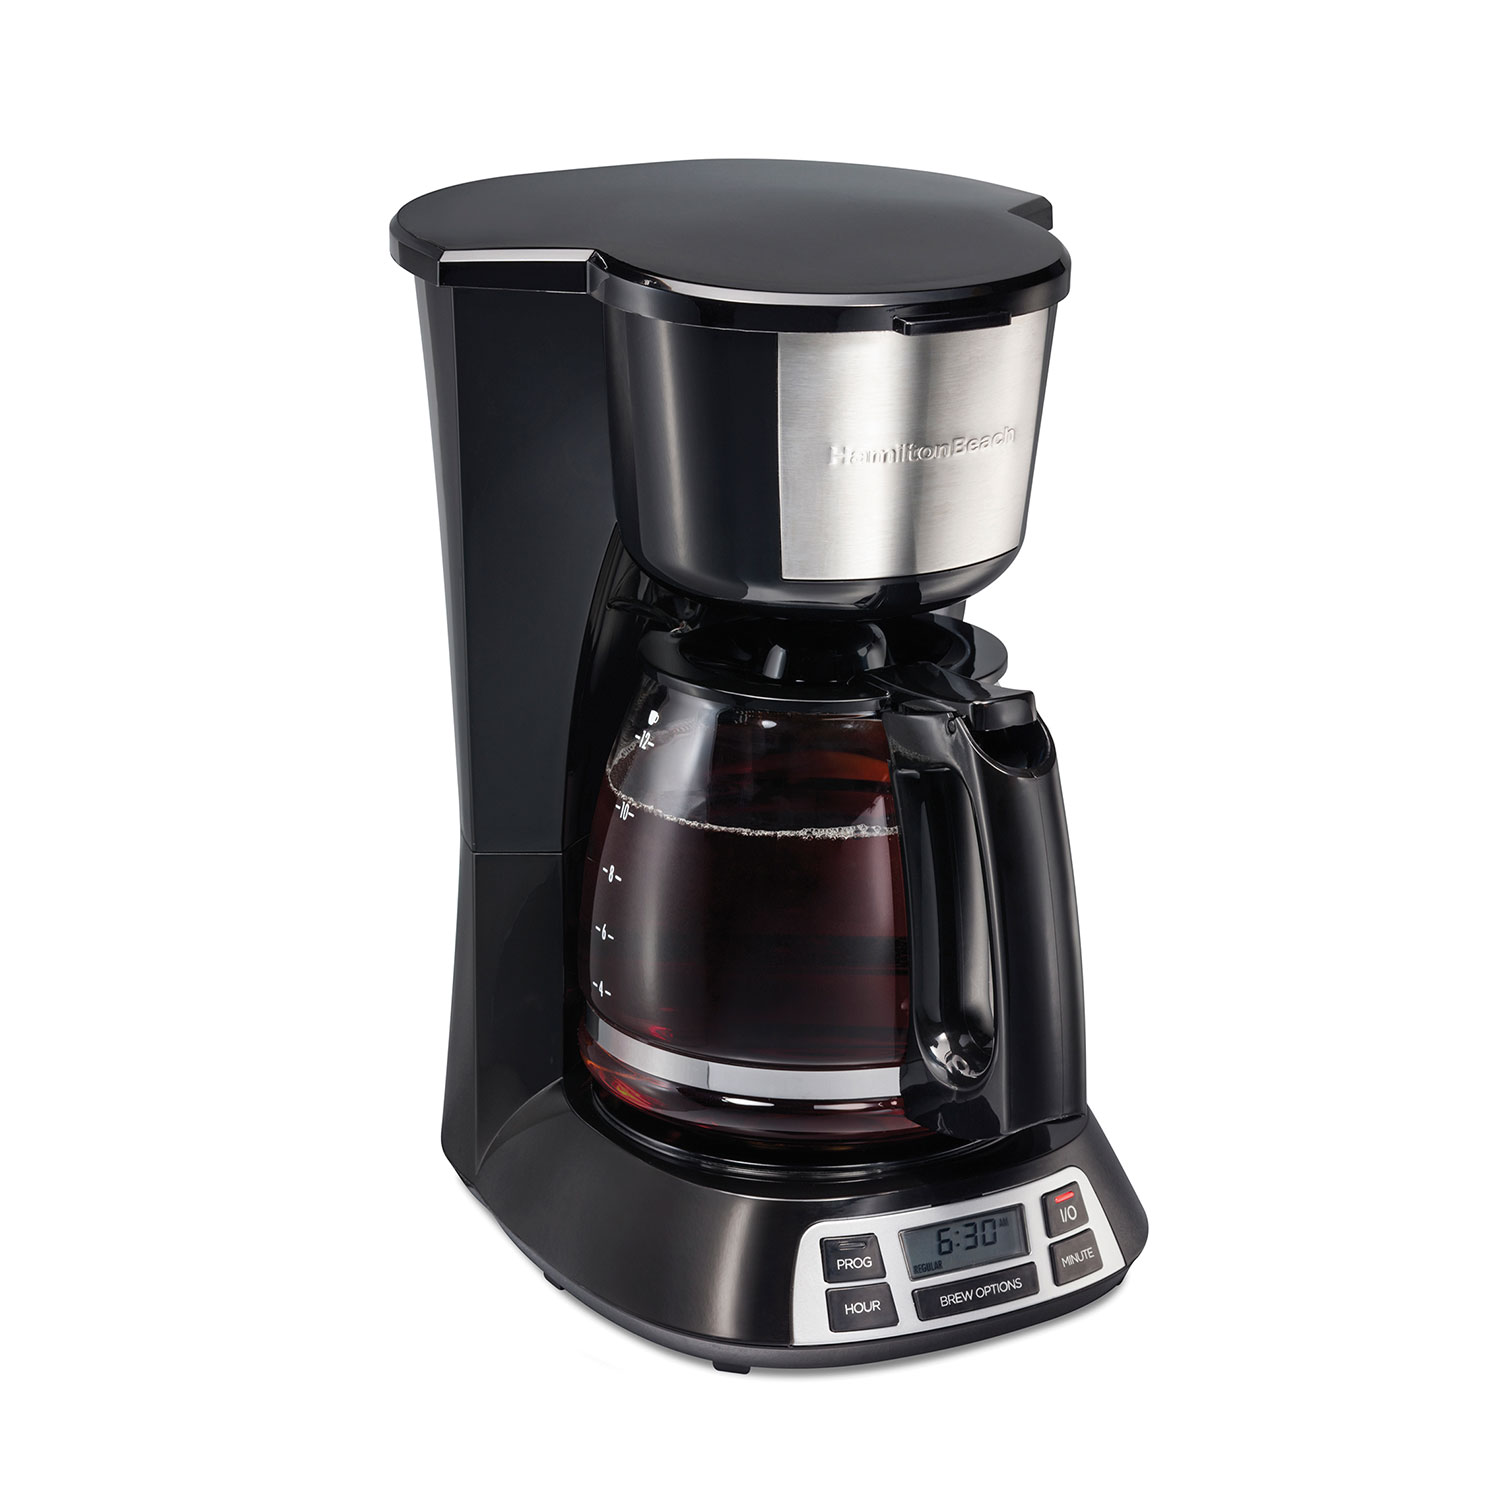 12 Cup Programmable Coffee Maker, Stainless Steel Accents (49630G)